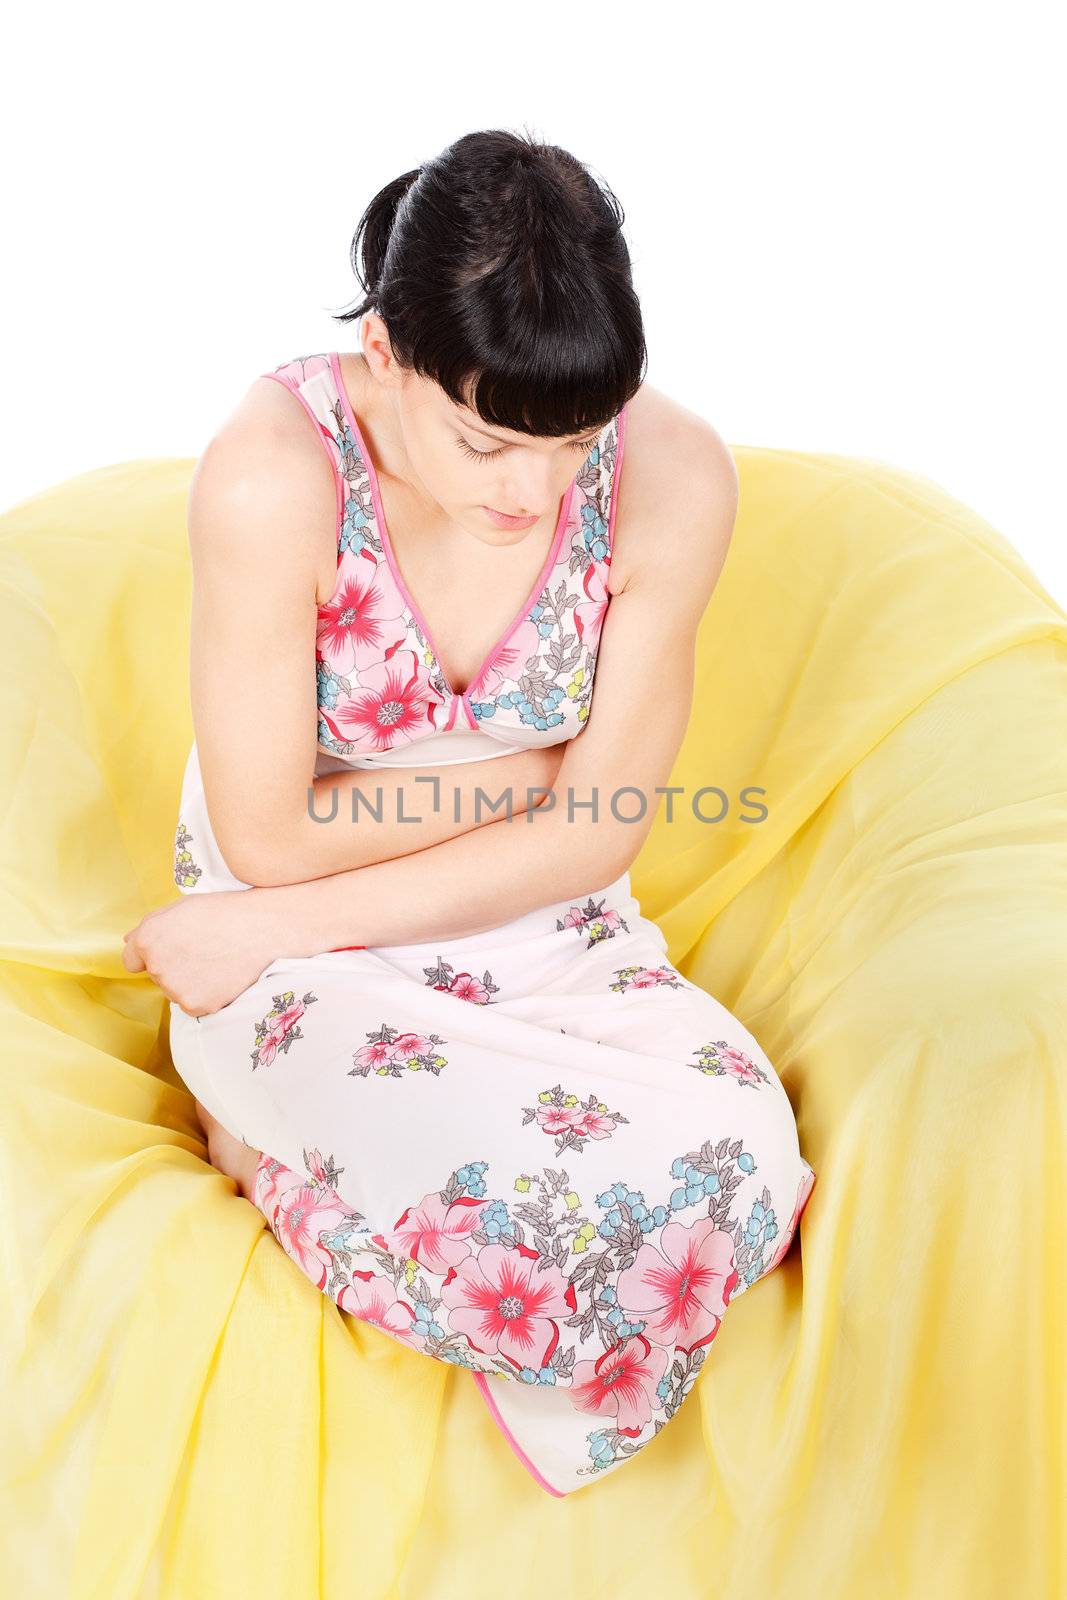 Girl in pain holding hands on stomach, isolated on white background